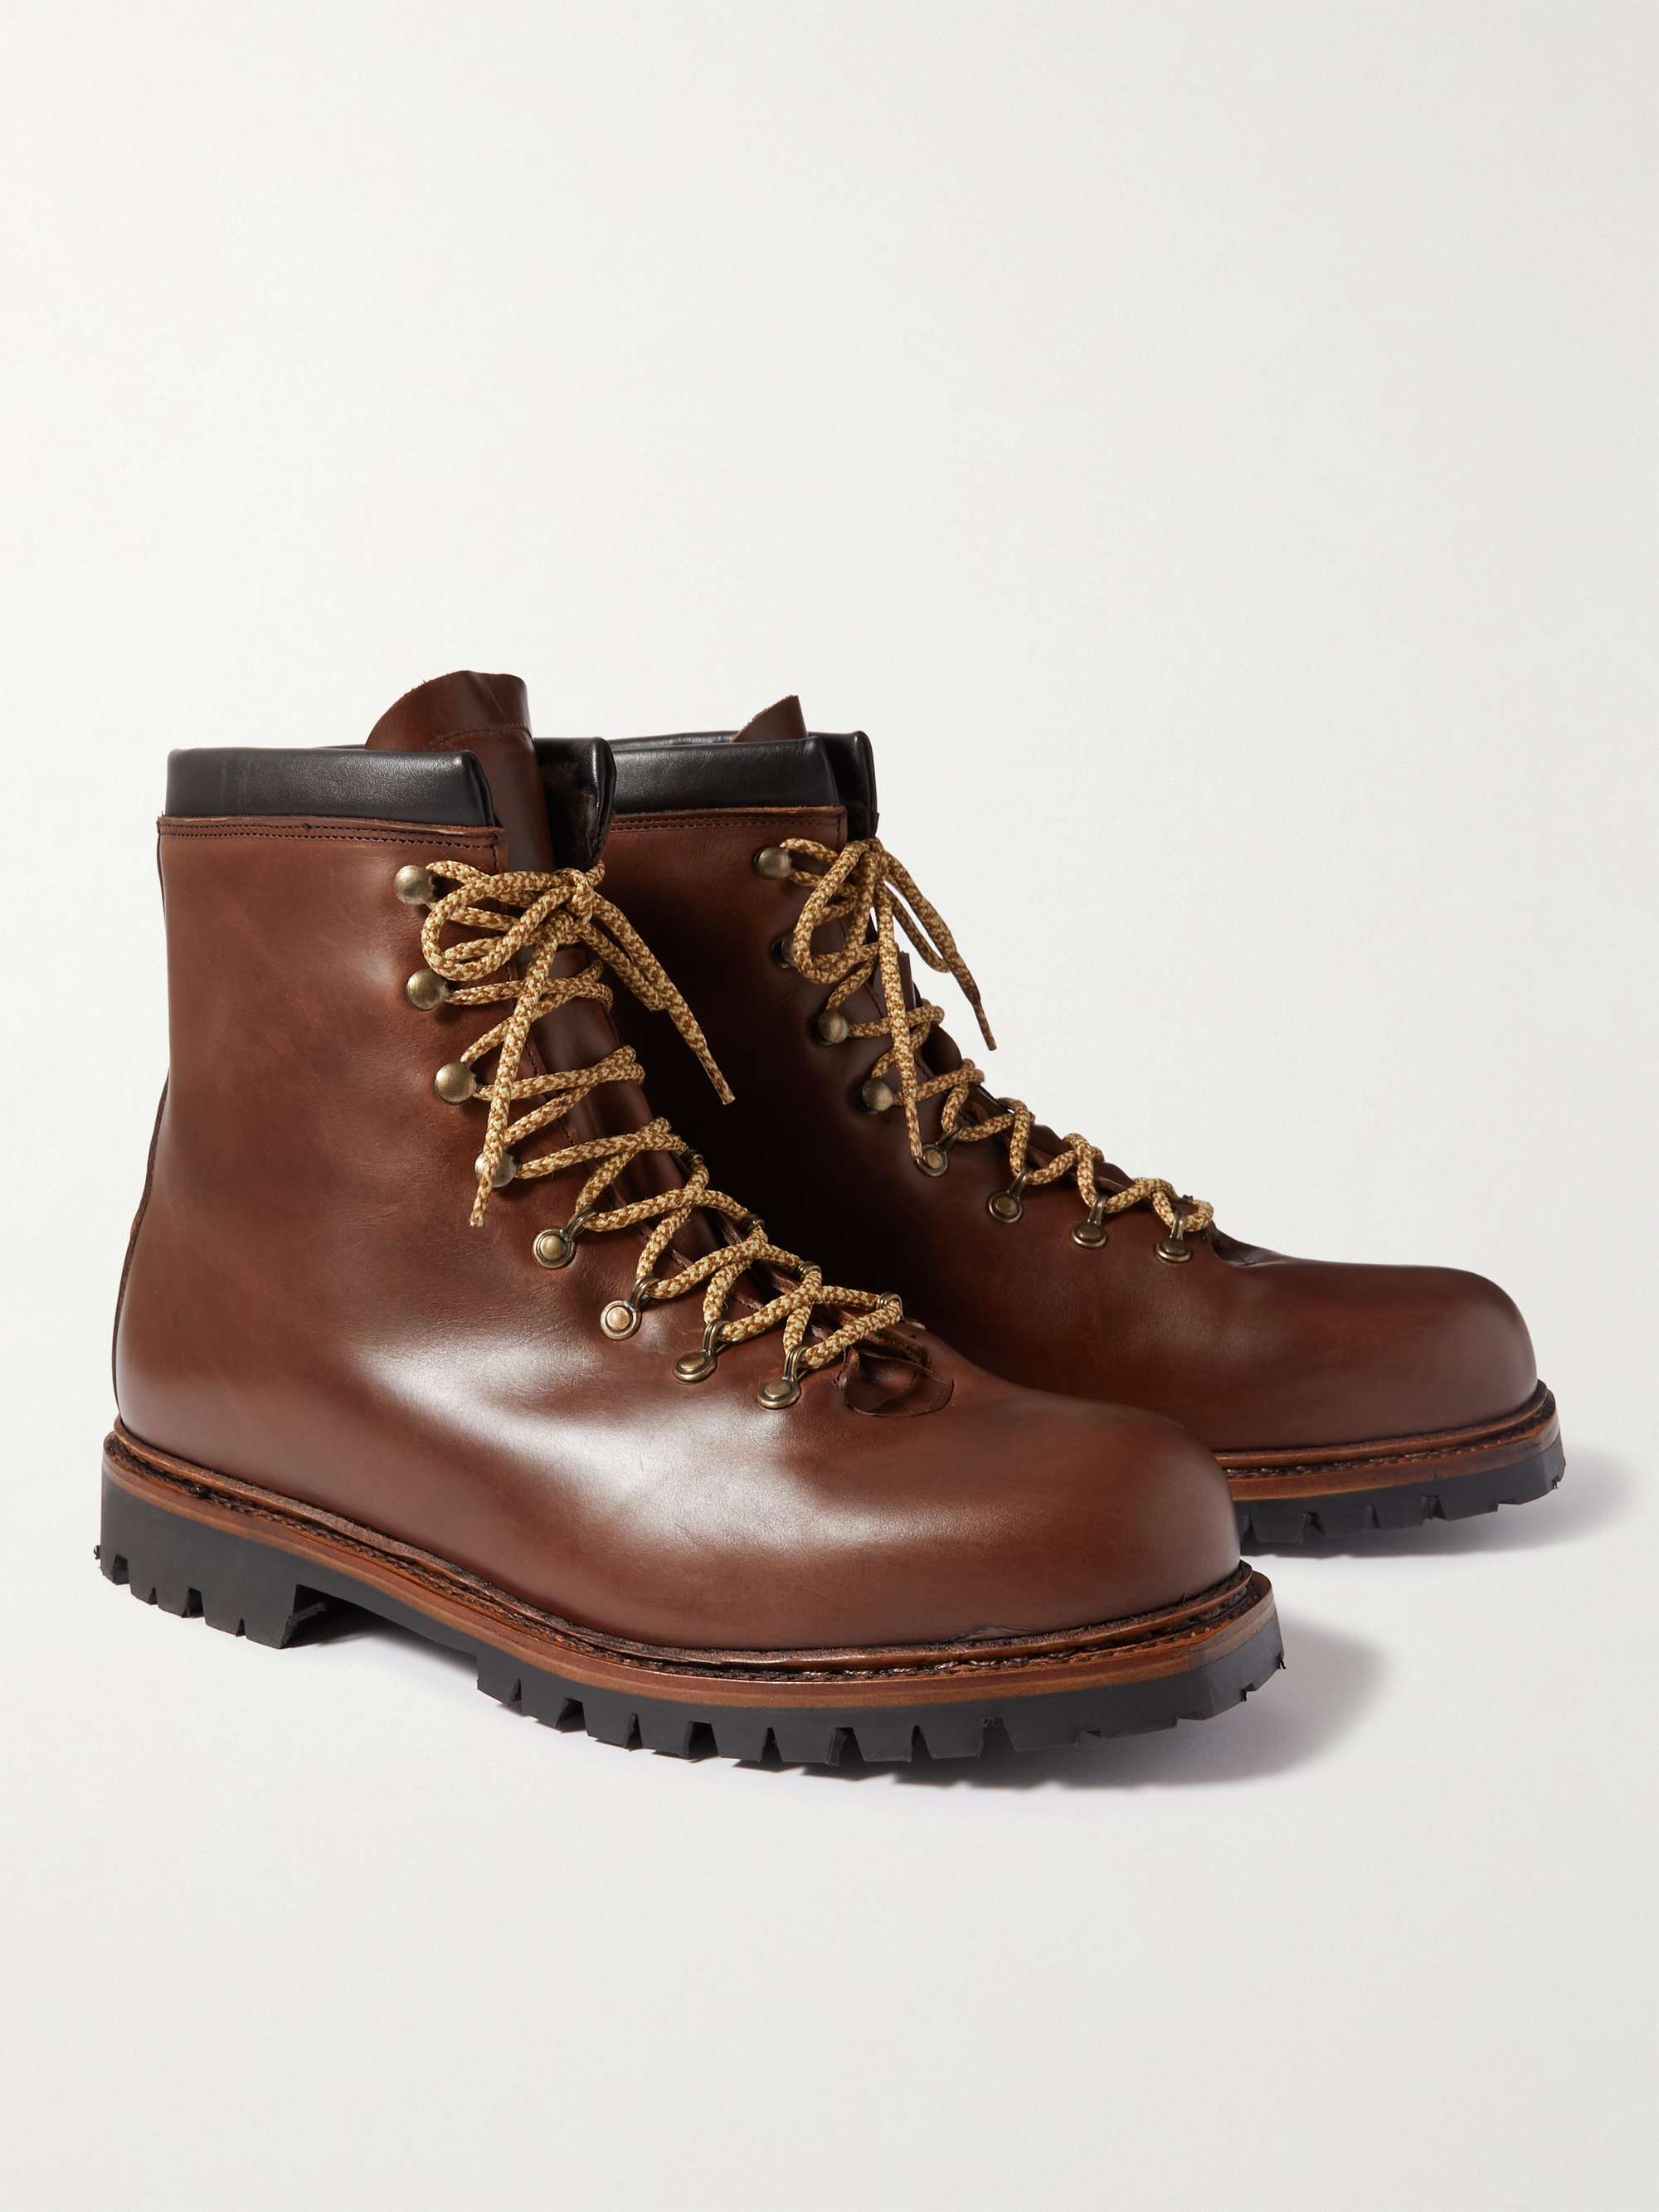 GEORGE CLEVERLEY Mountain Shearling-Lined Leather Boots